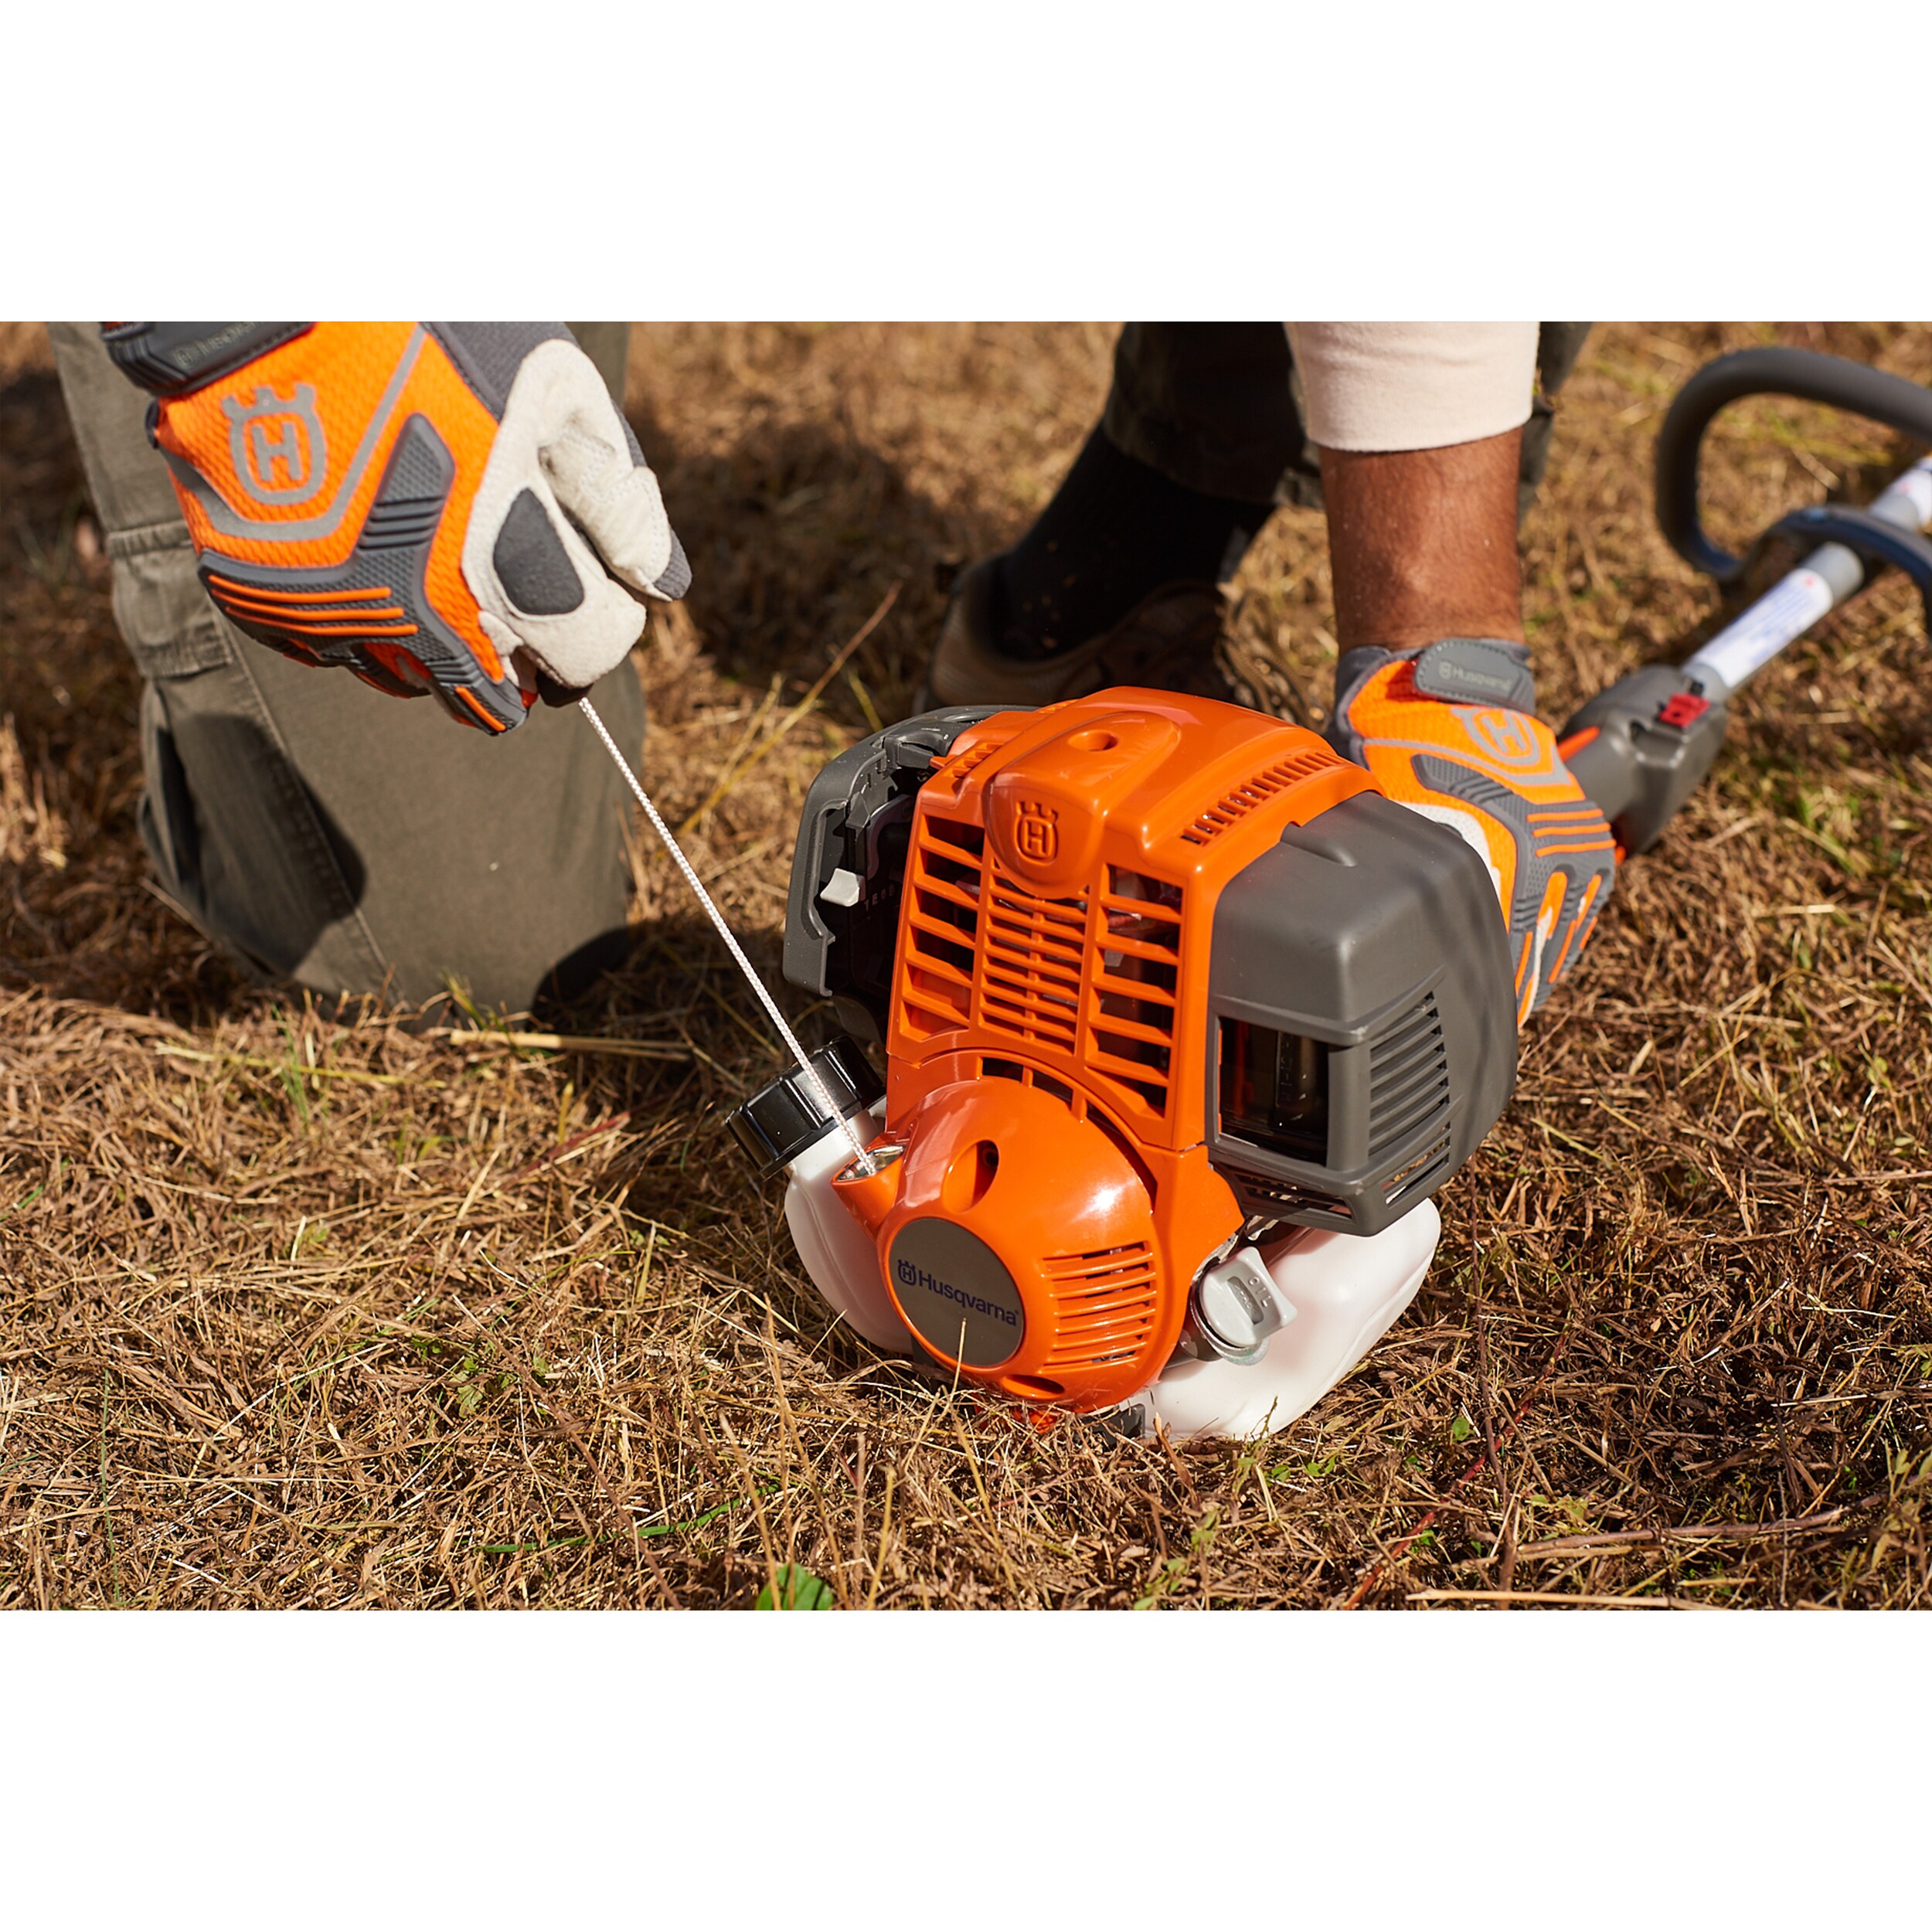 Husqvarna 324l 25 Cc 4 Cycle 18 In Straight Shaft Gas String Trimmer At